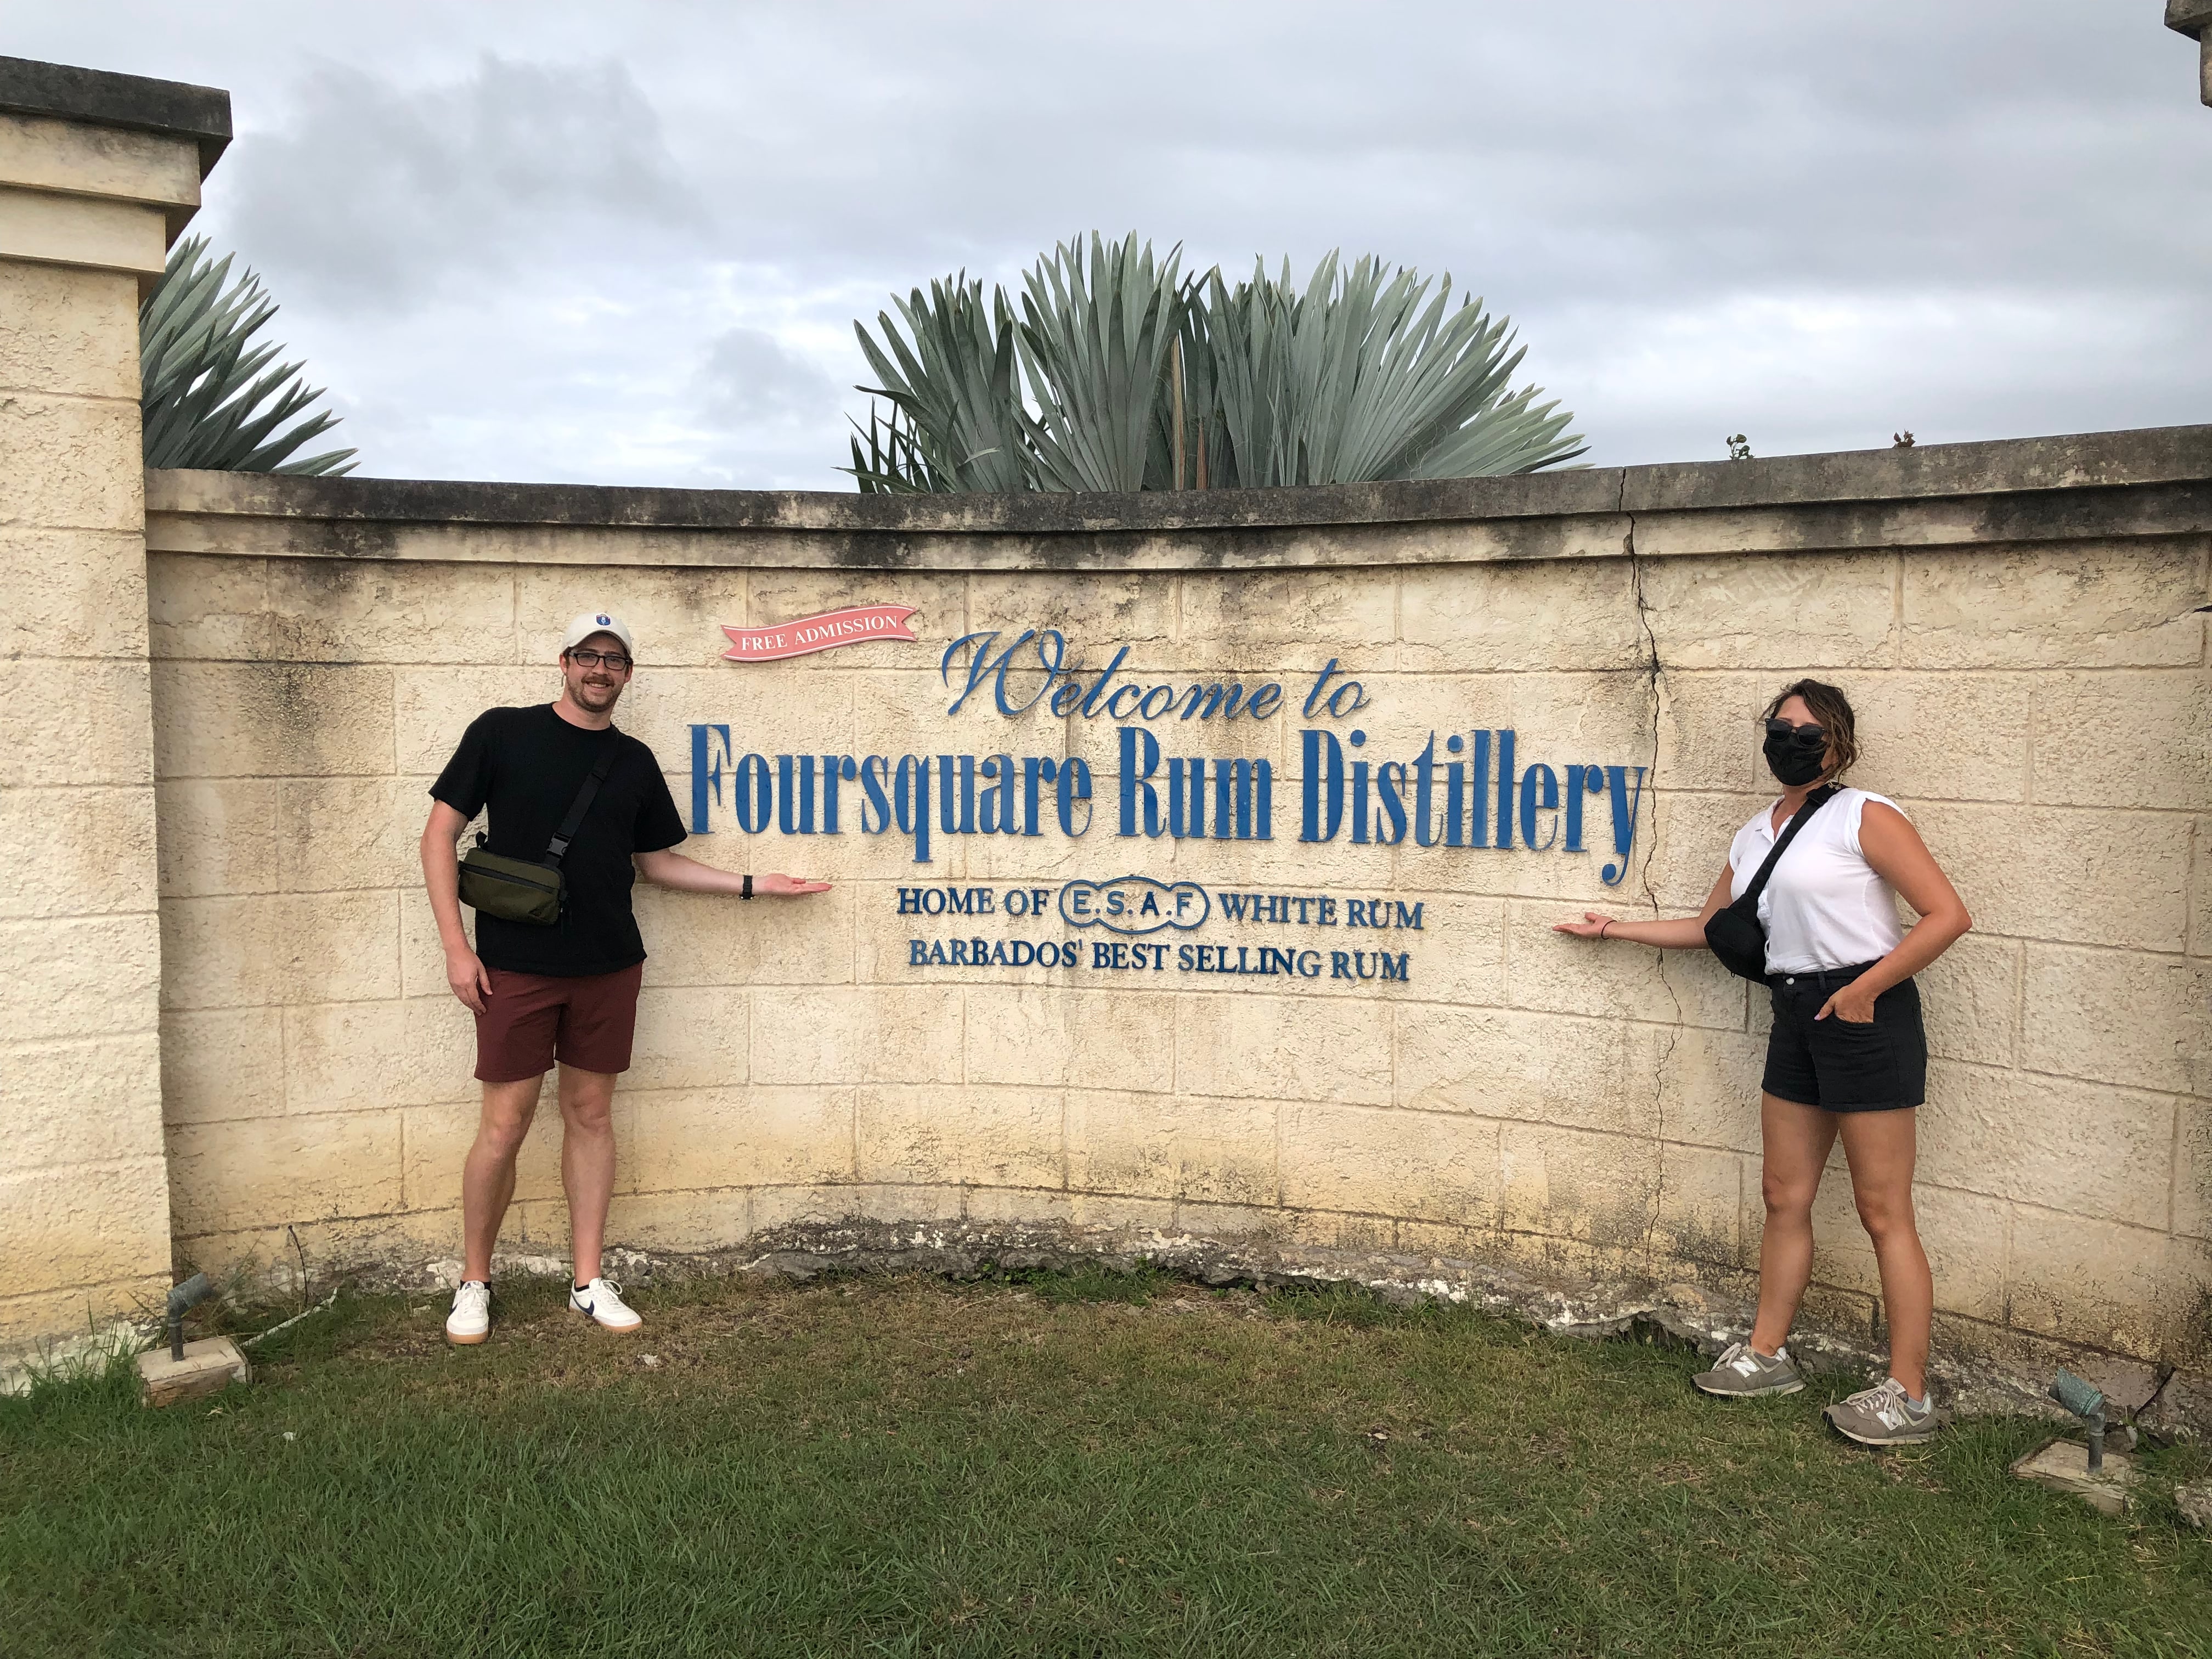 Geoff and Helen in front of the Foursquare Rum Distillery sign